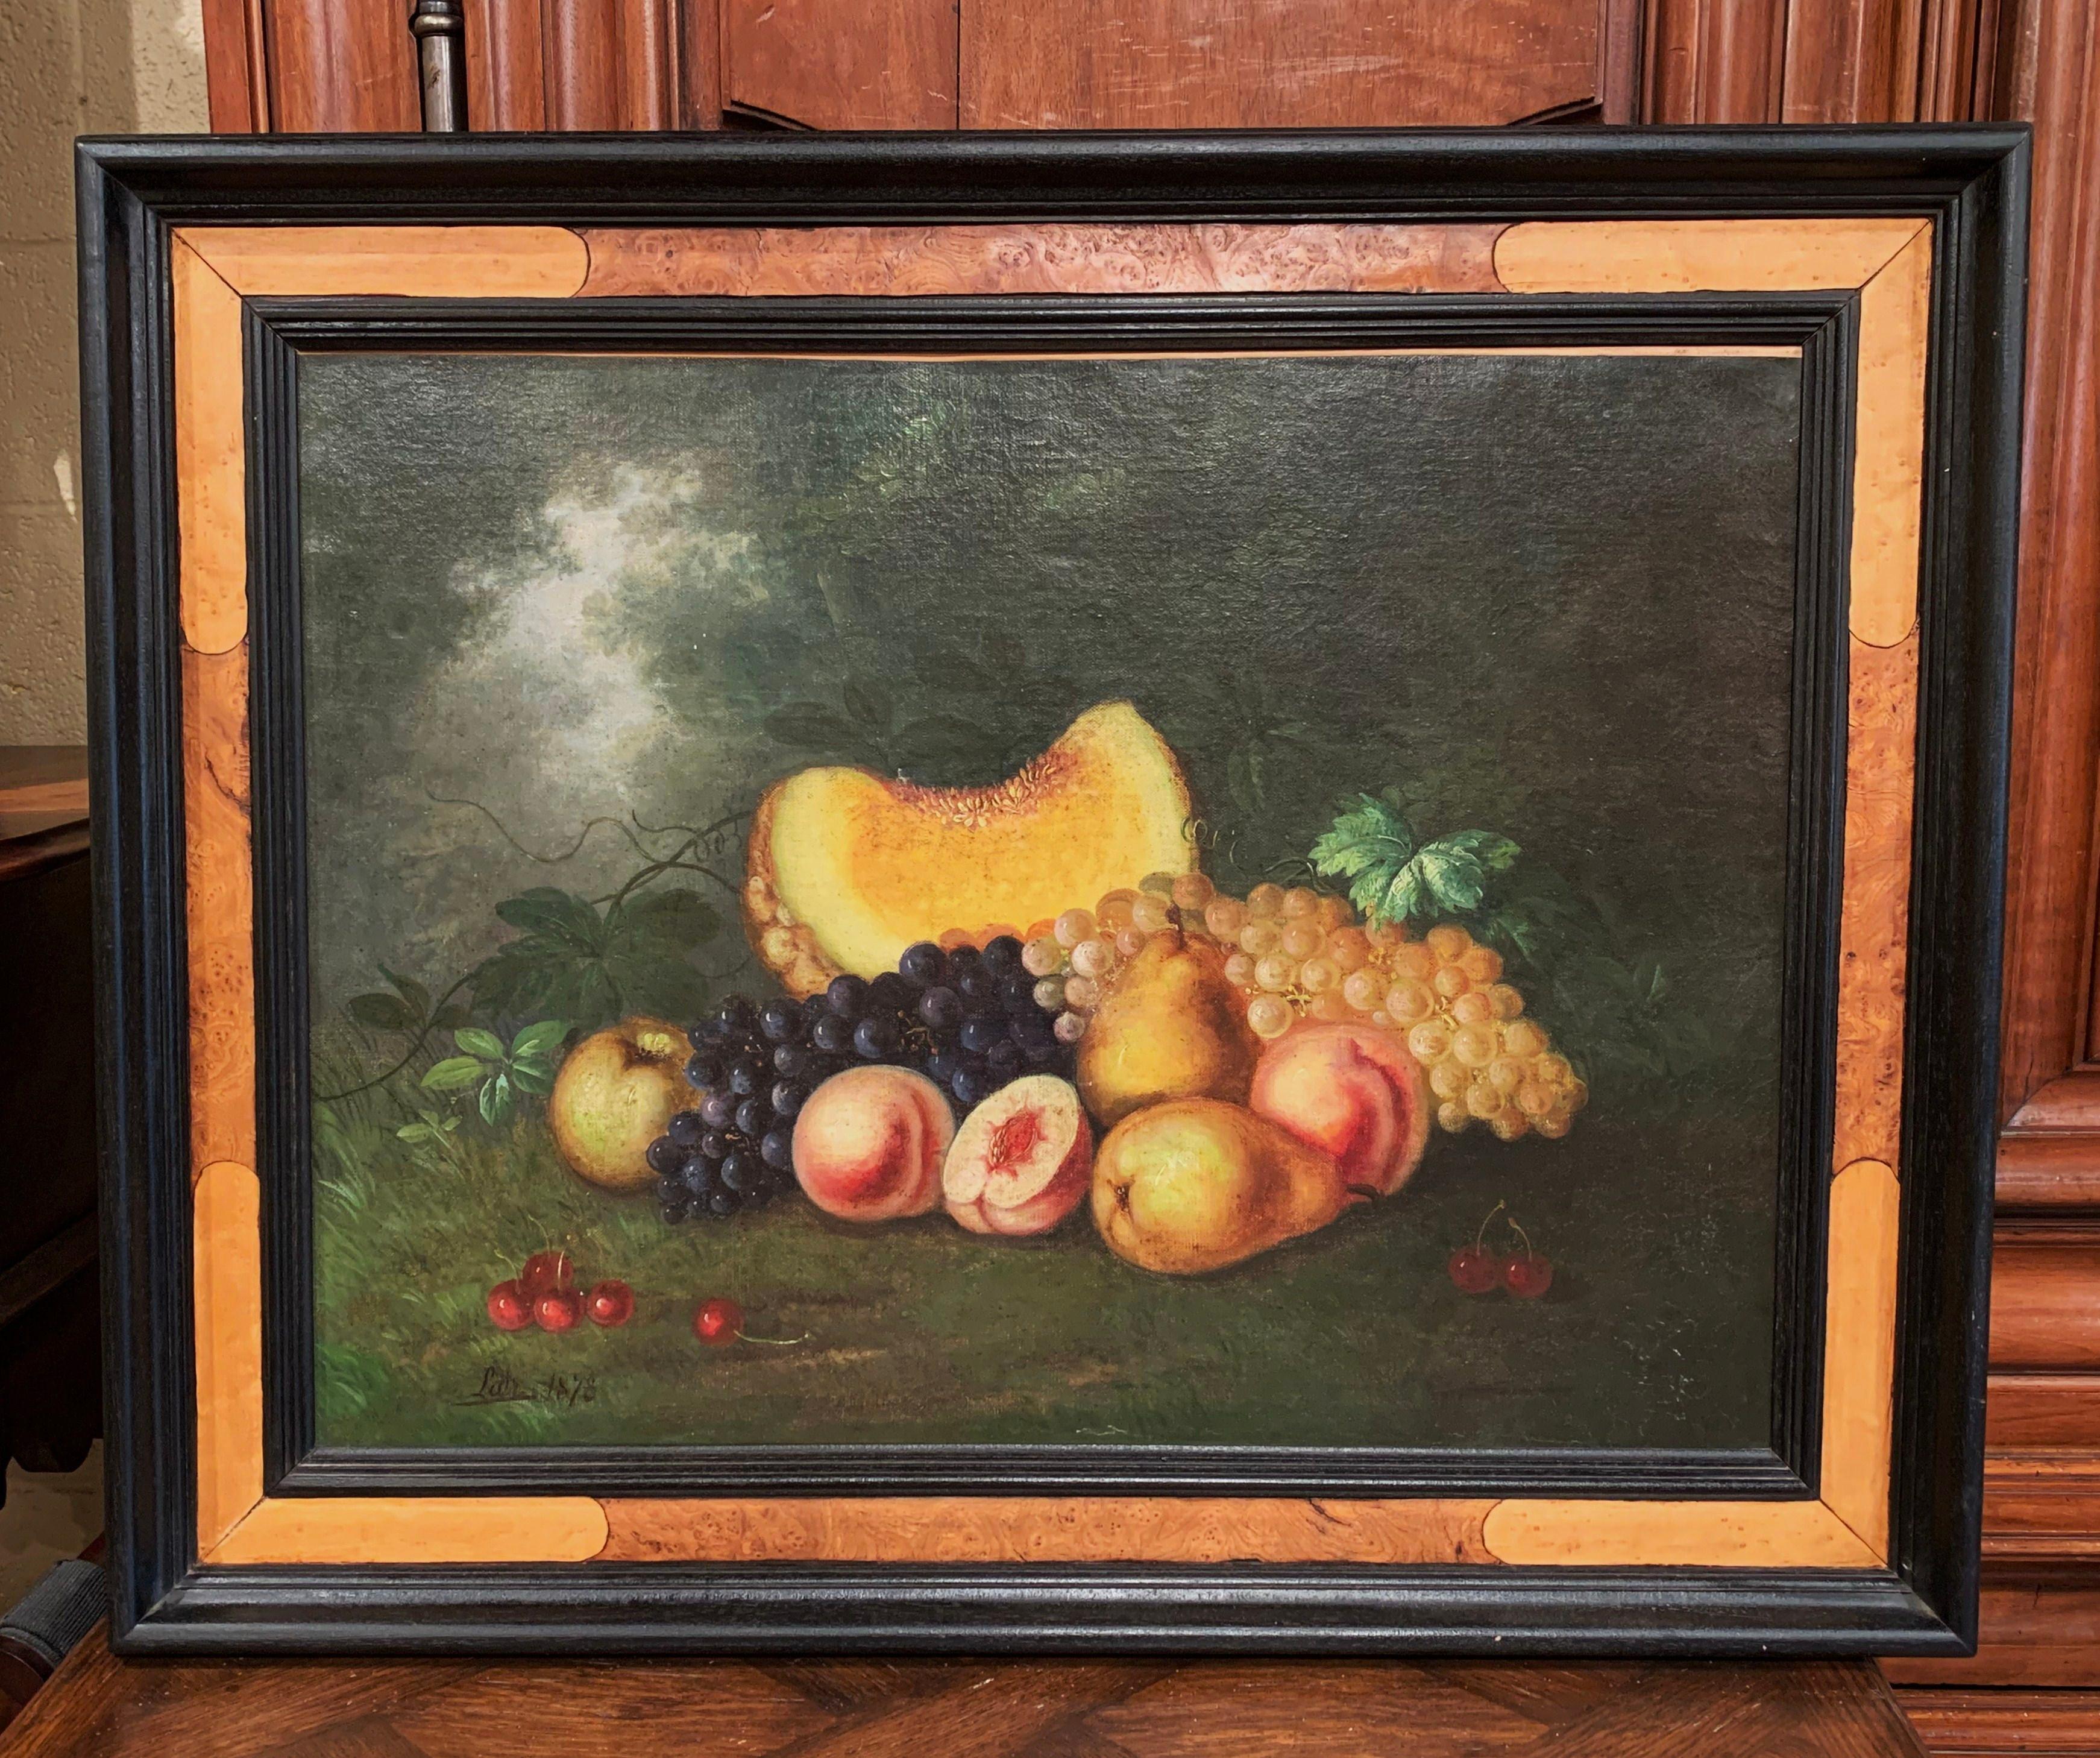 19th Century French Still Life Oil Painting on Canvas Signed and Dated 1878 For Sale 1